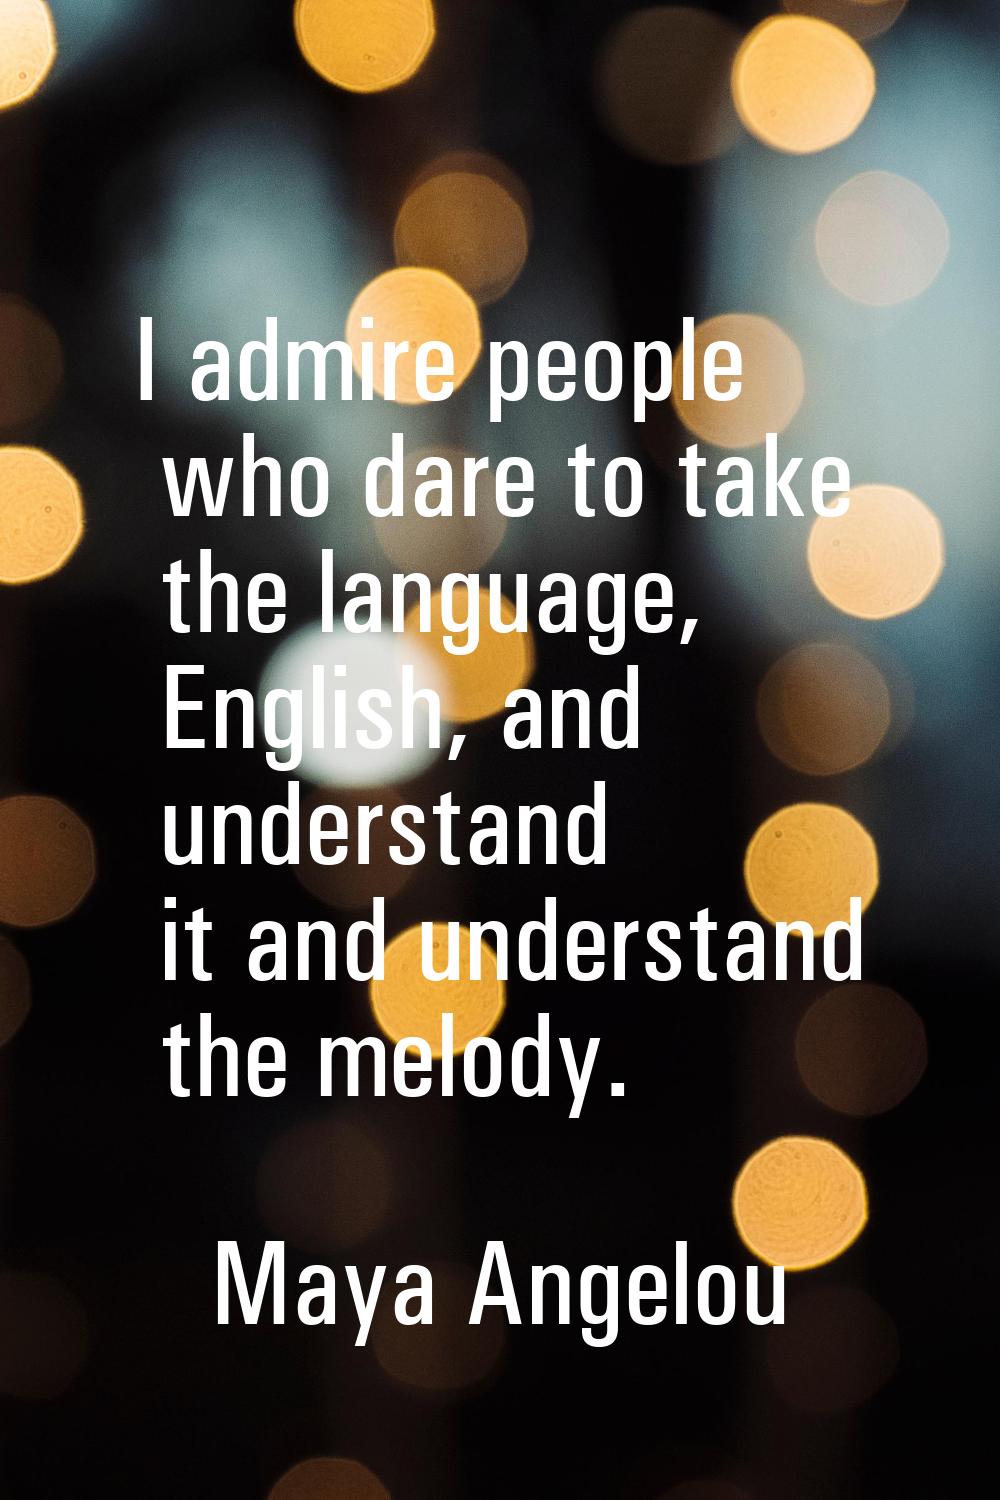 I admire people who dare to take the language, English, and understand it and understand the melody